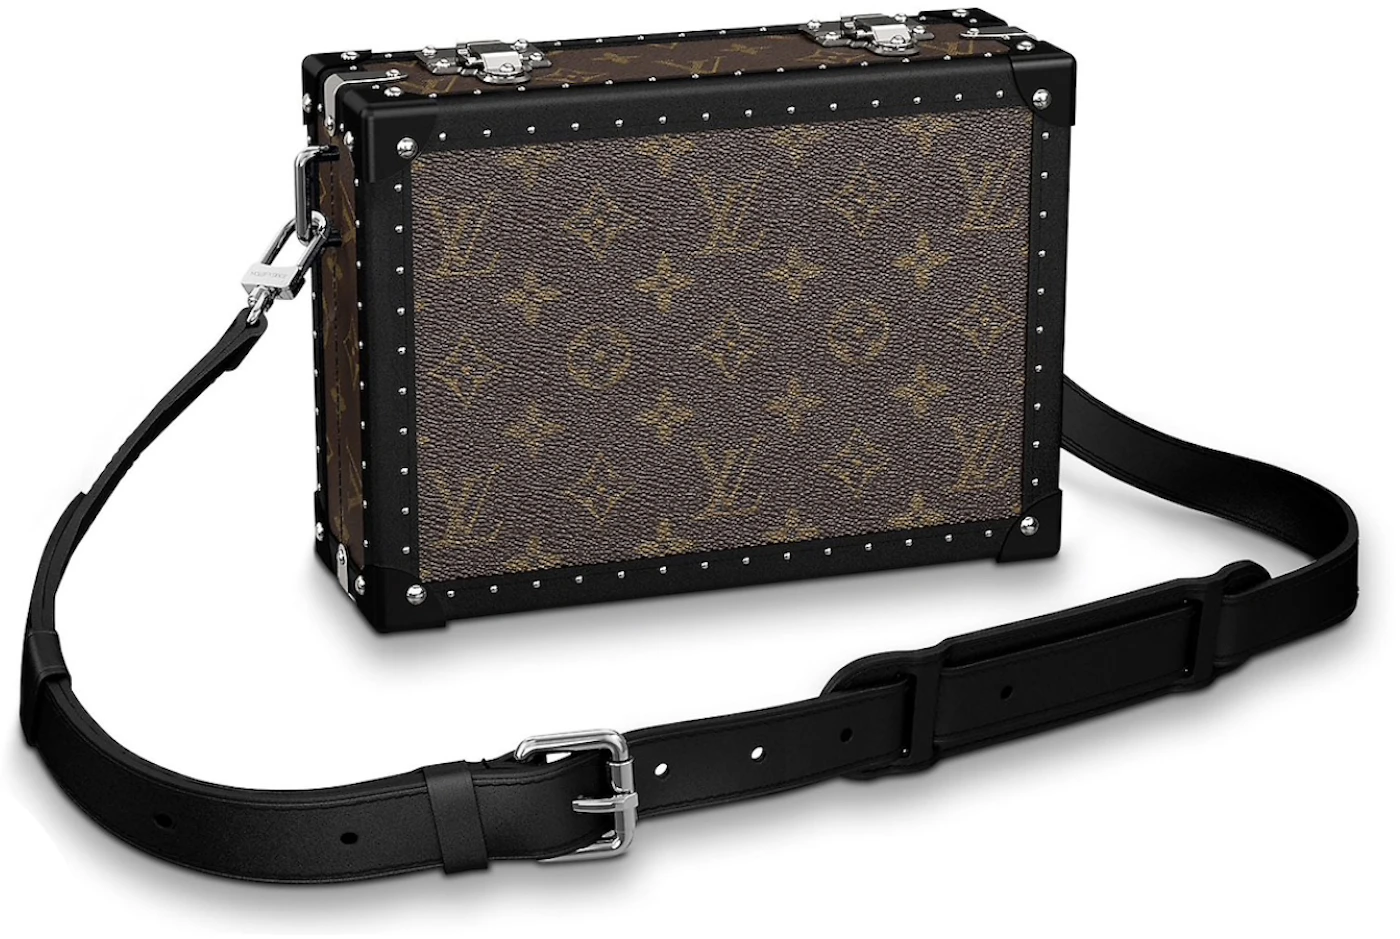 Louis Vuitton Clutch Box bag in brown monogram and black leather - DOWNTOWN  UPTOWN Genève